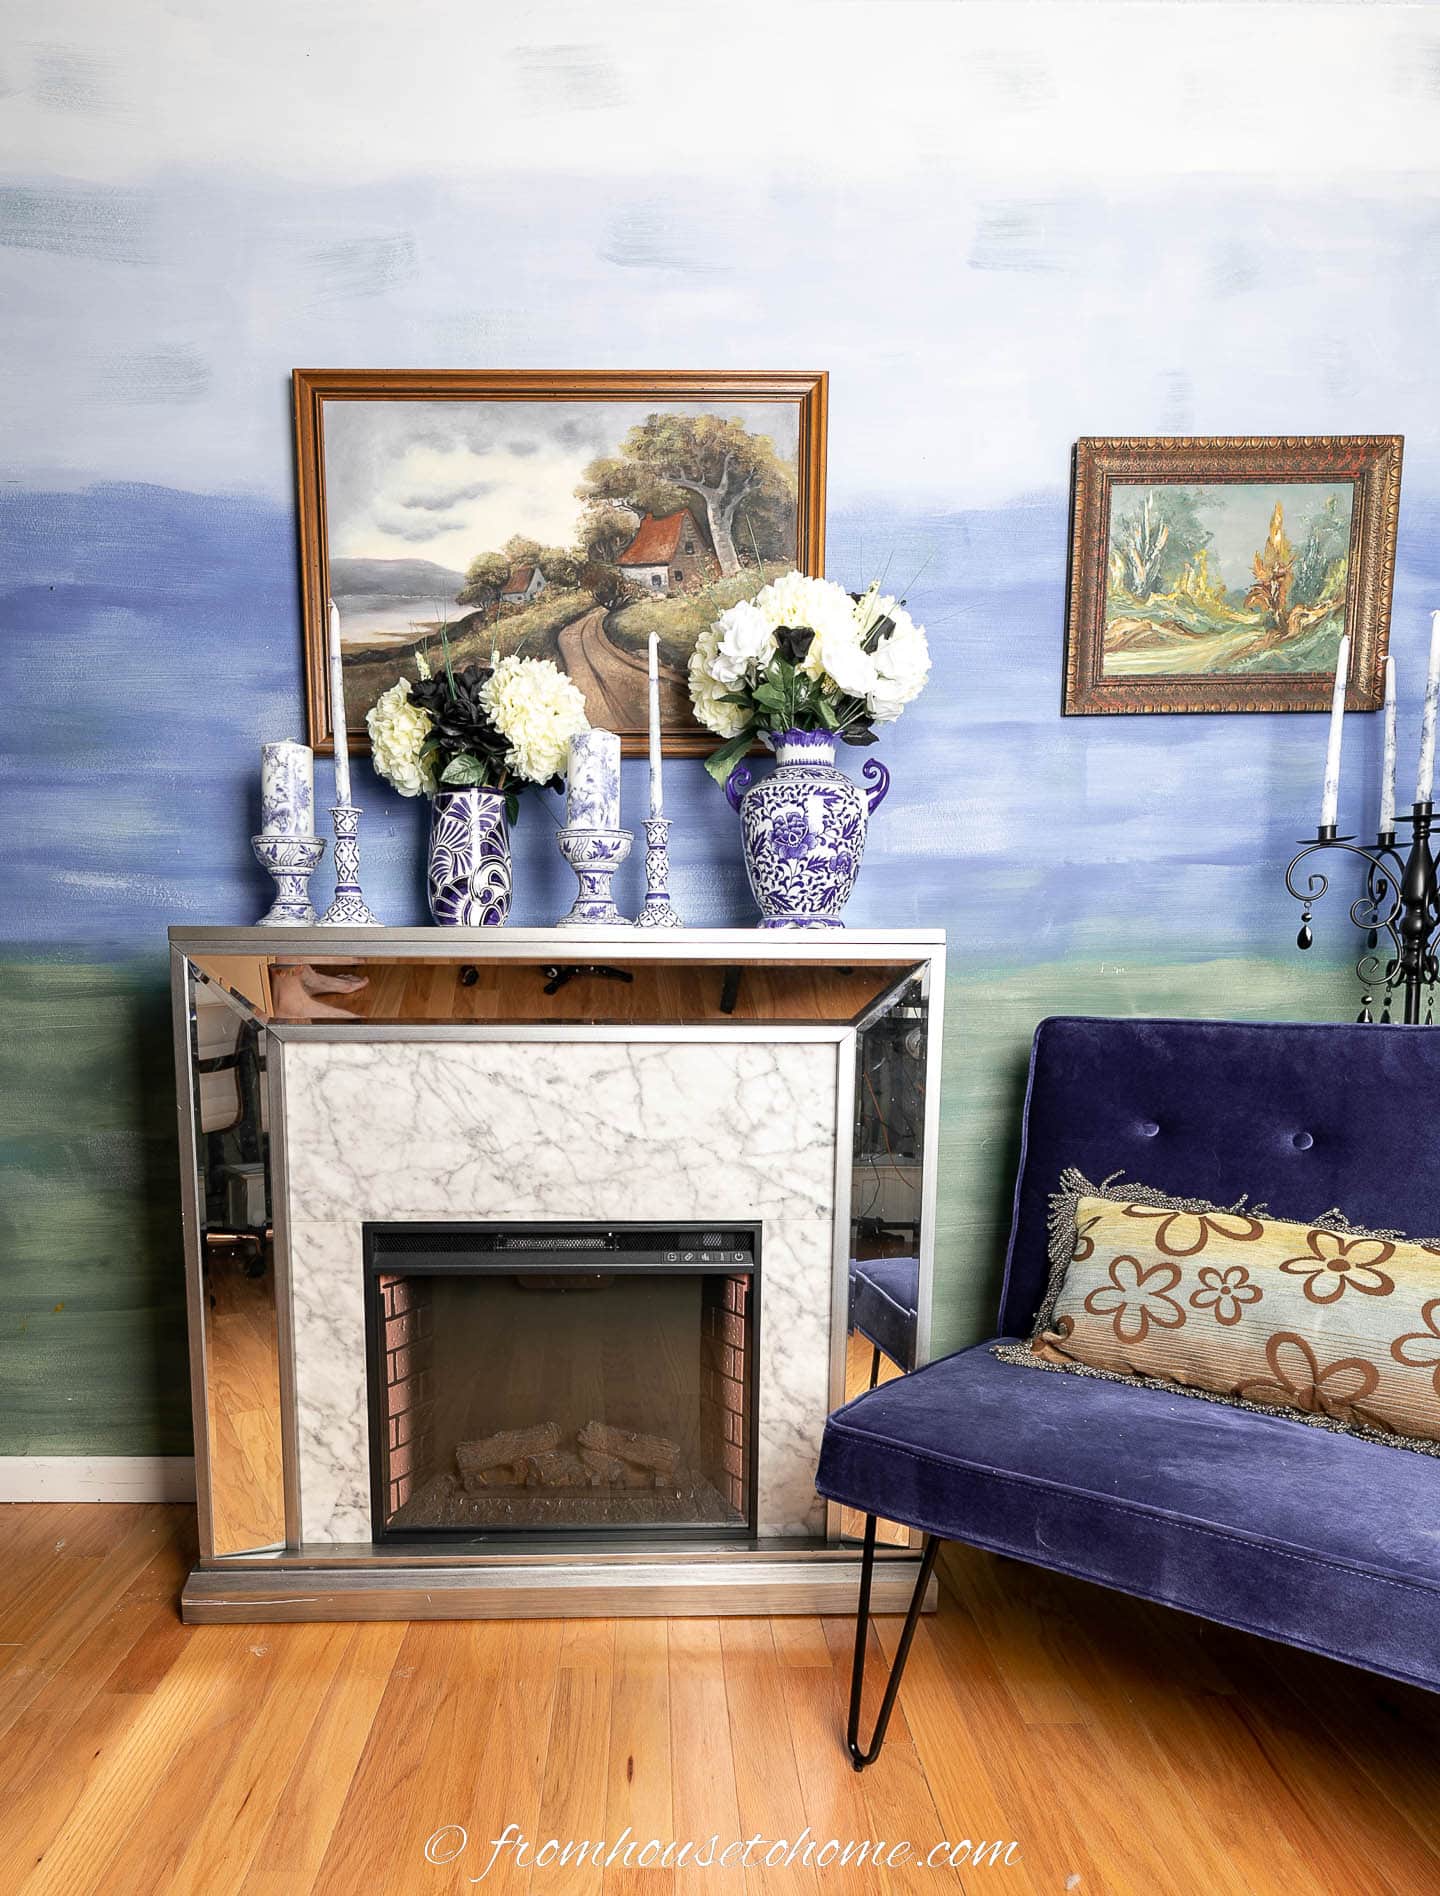 A fireplace and a blue velvet chair in front of a green and blue ombre wall